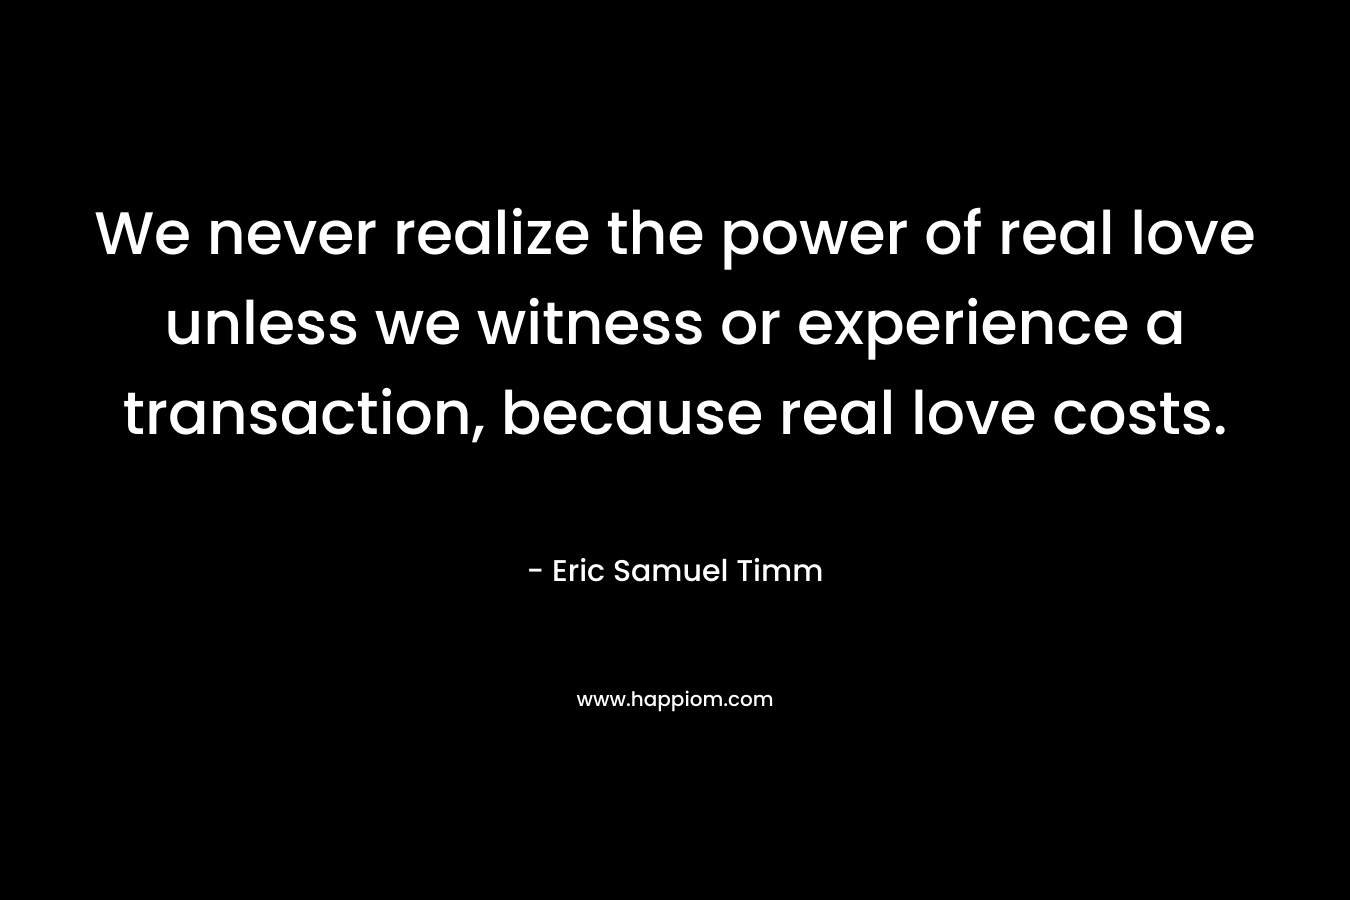 We never realize the power of real love unless we witness or experience a transaction, because real love costs.